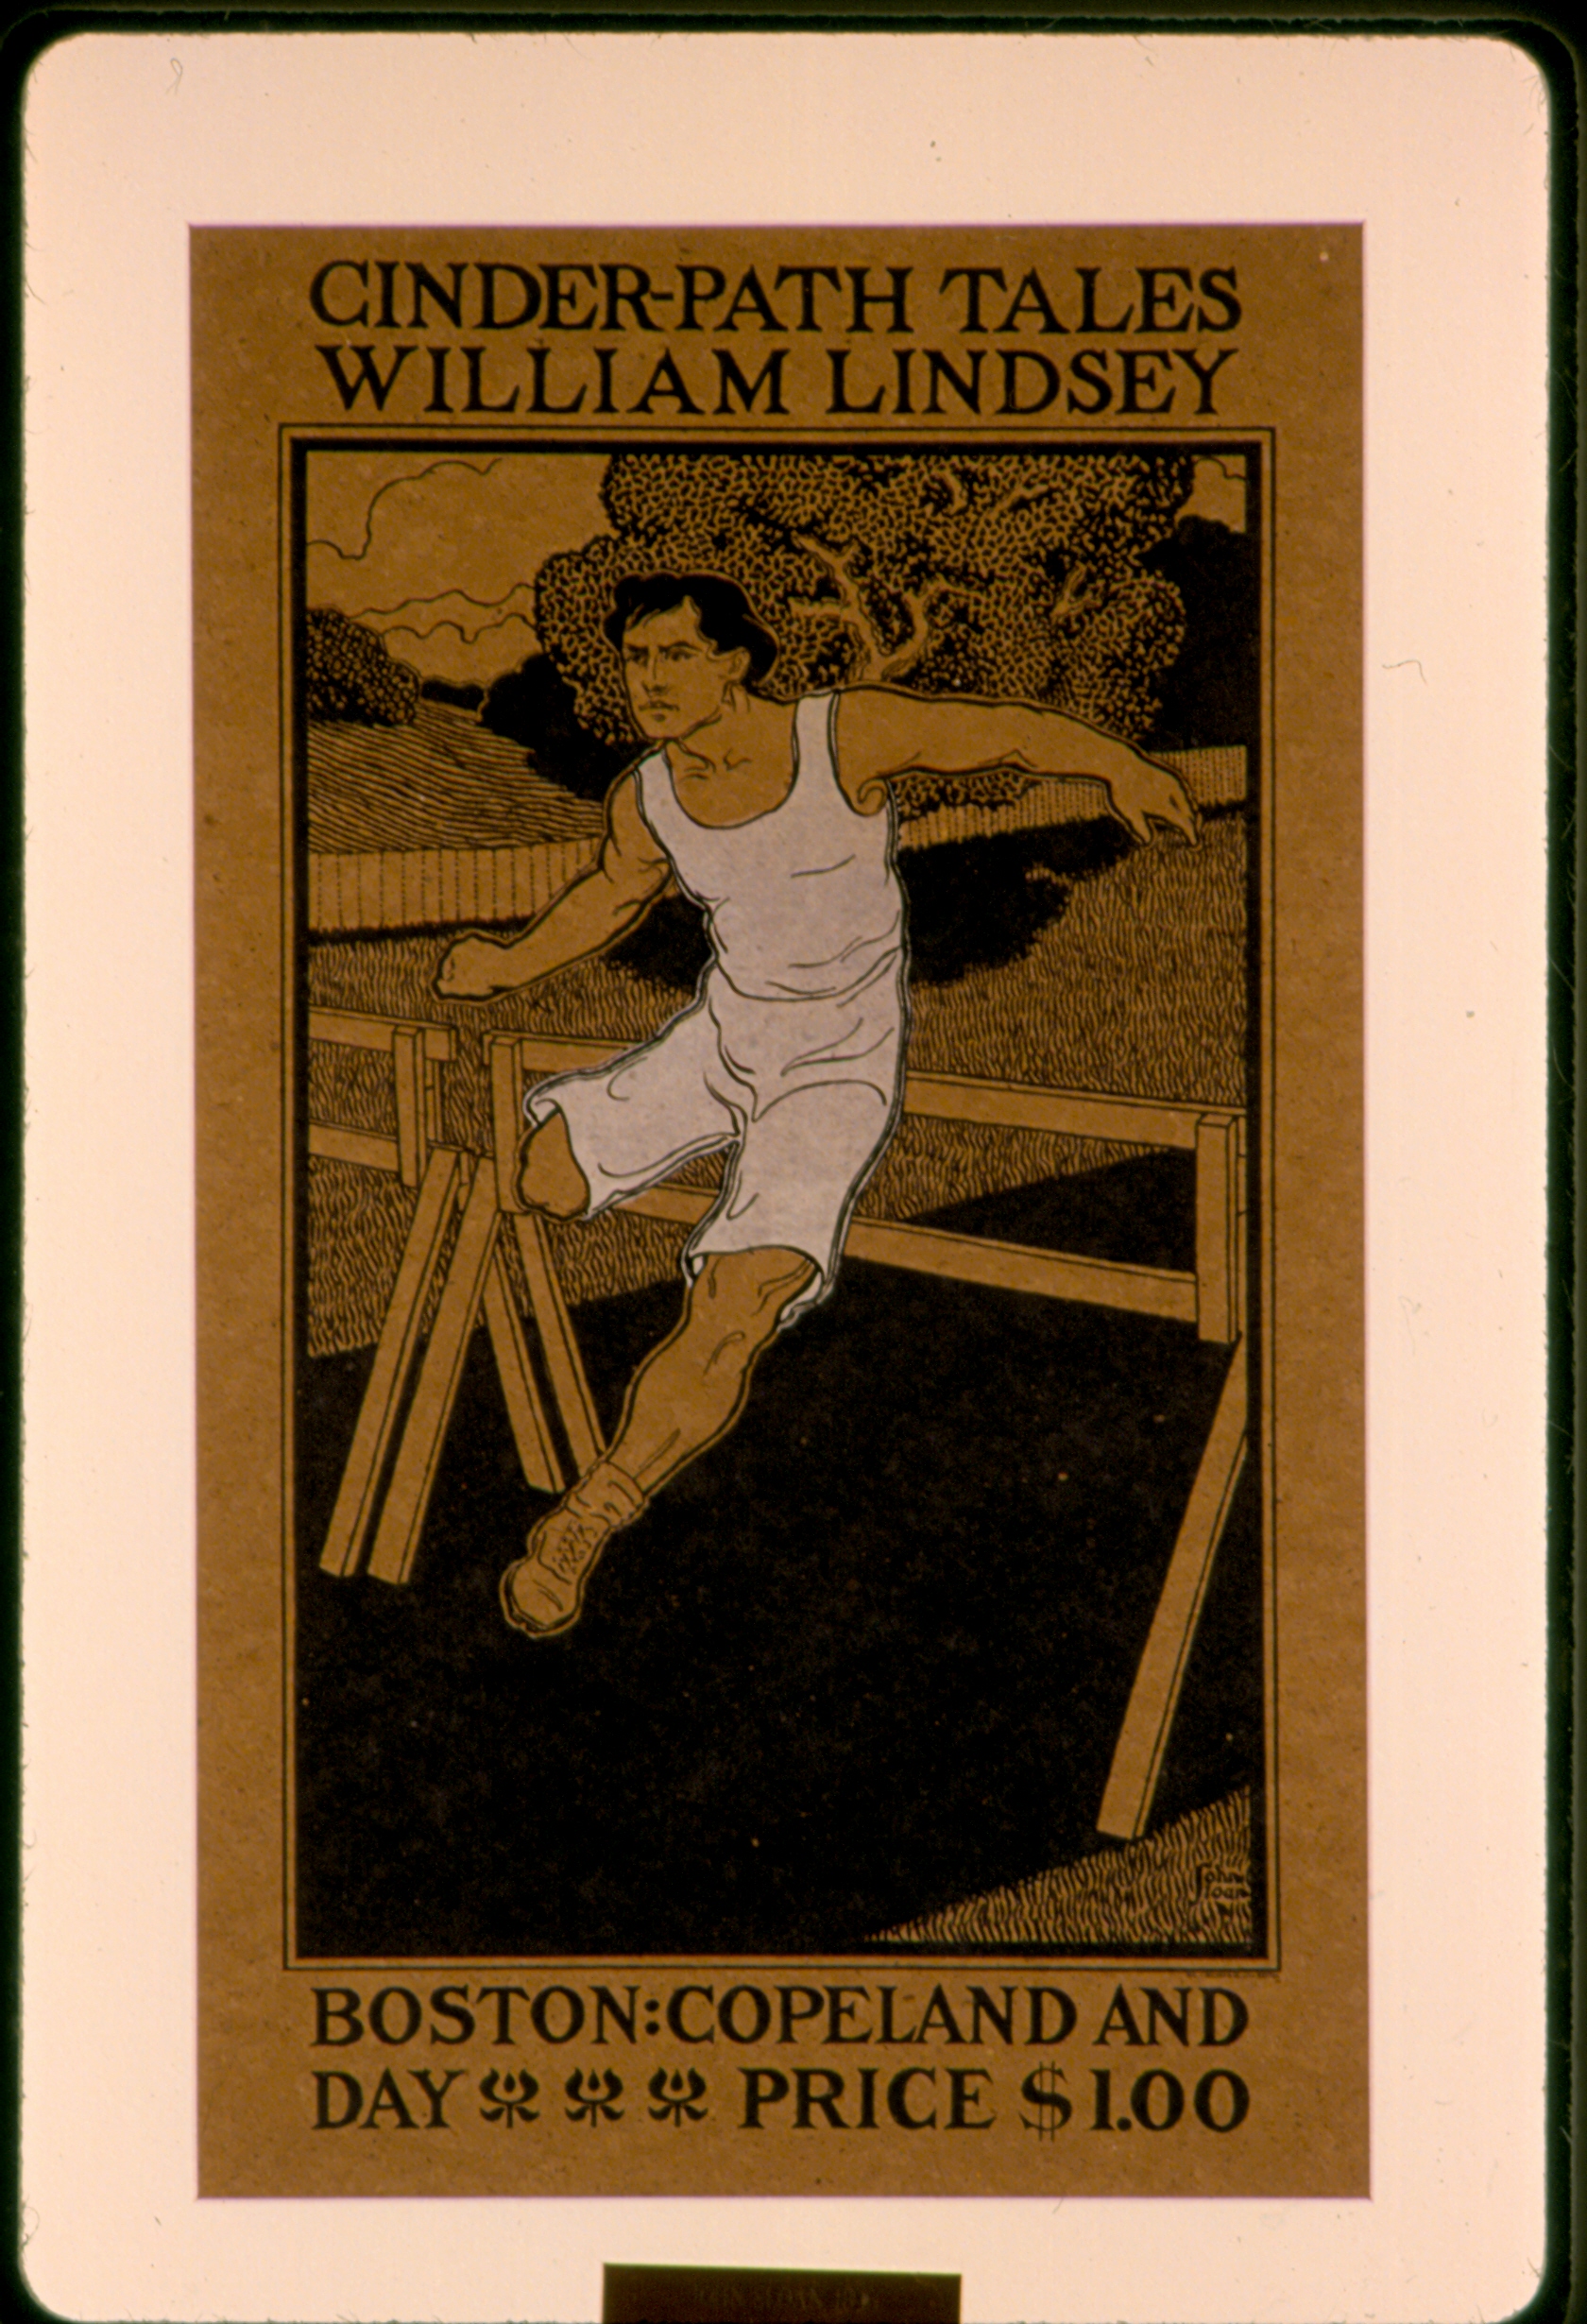 A sepia drawing of a male runner in white clothes jumping over hurdles.